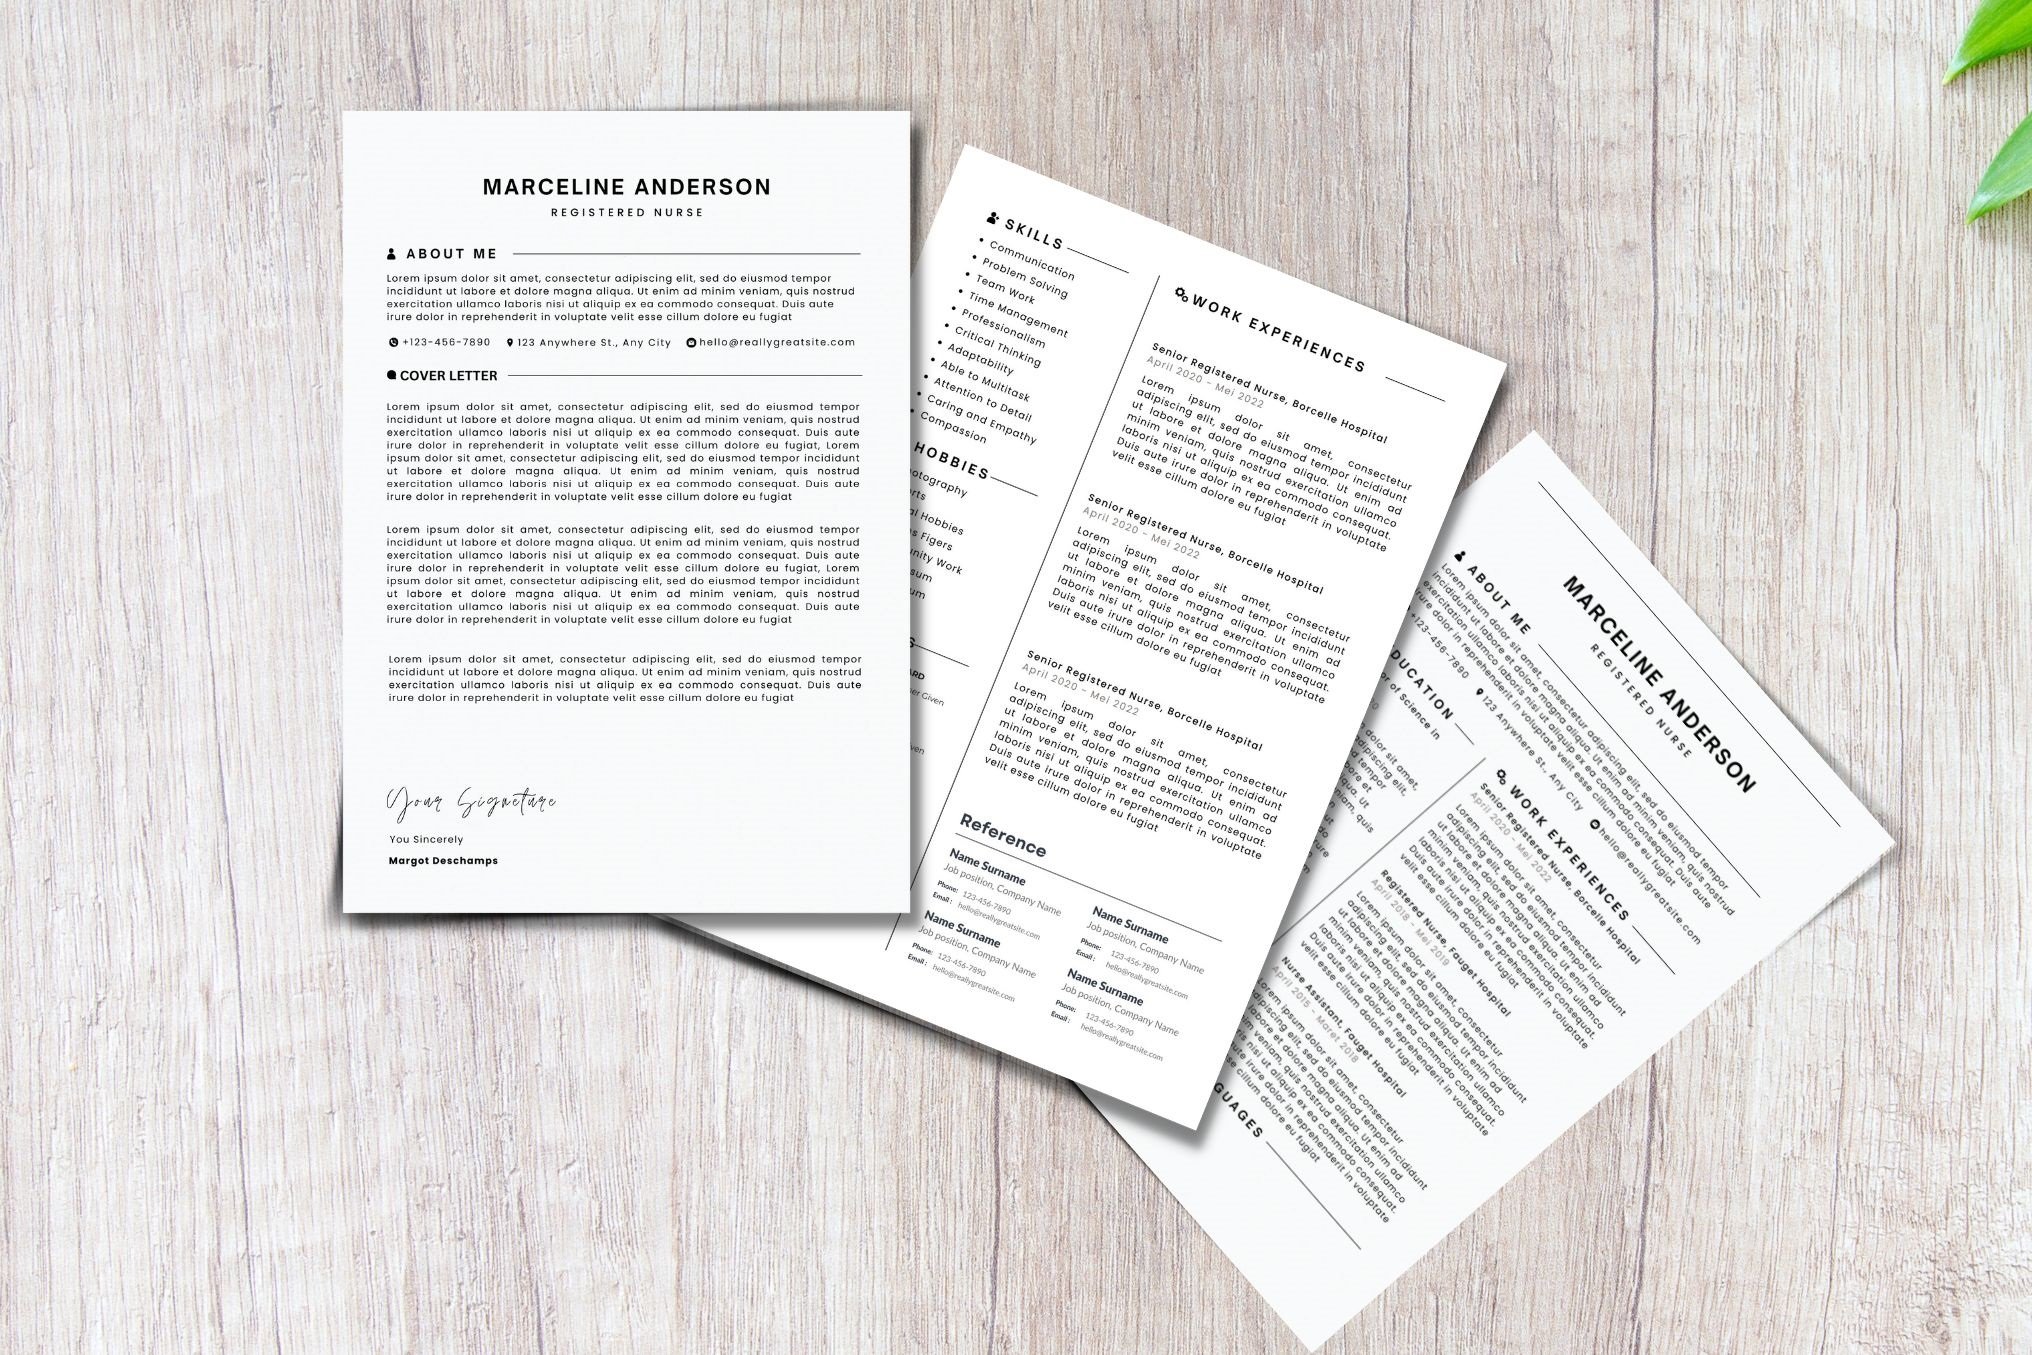 Three pages of a resume sitting on top of a wooden table.